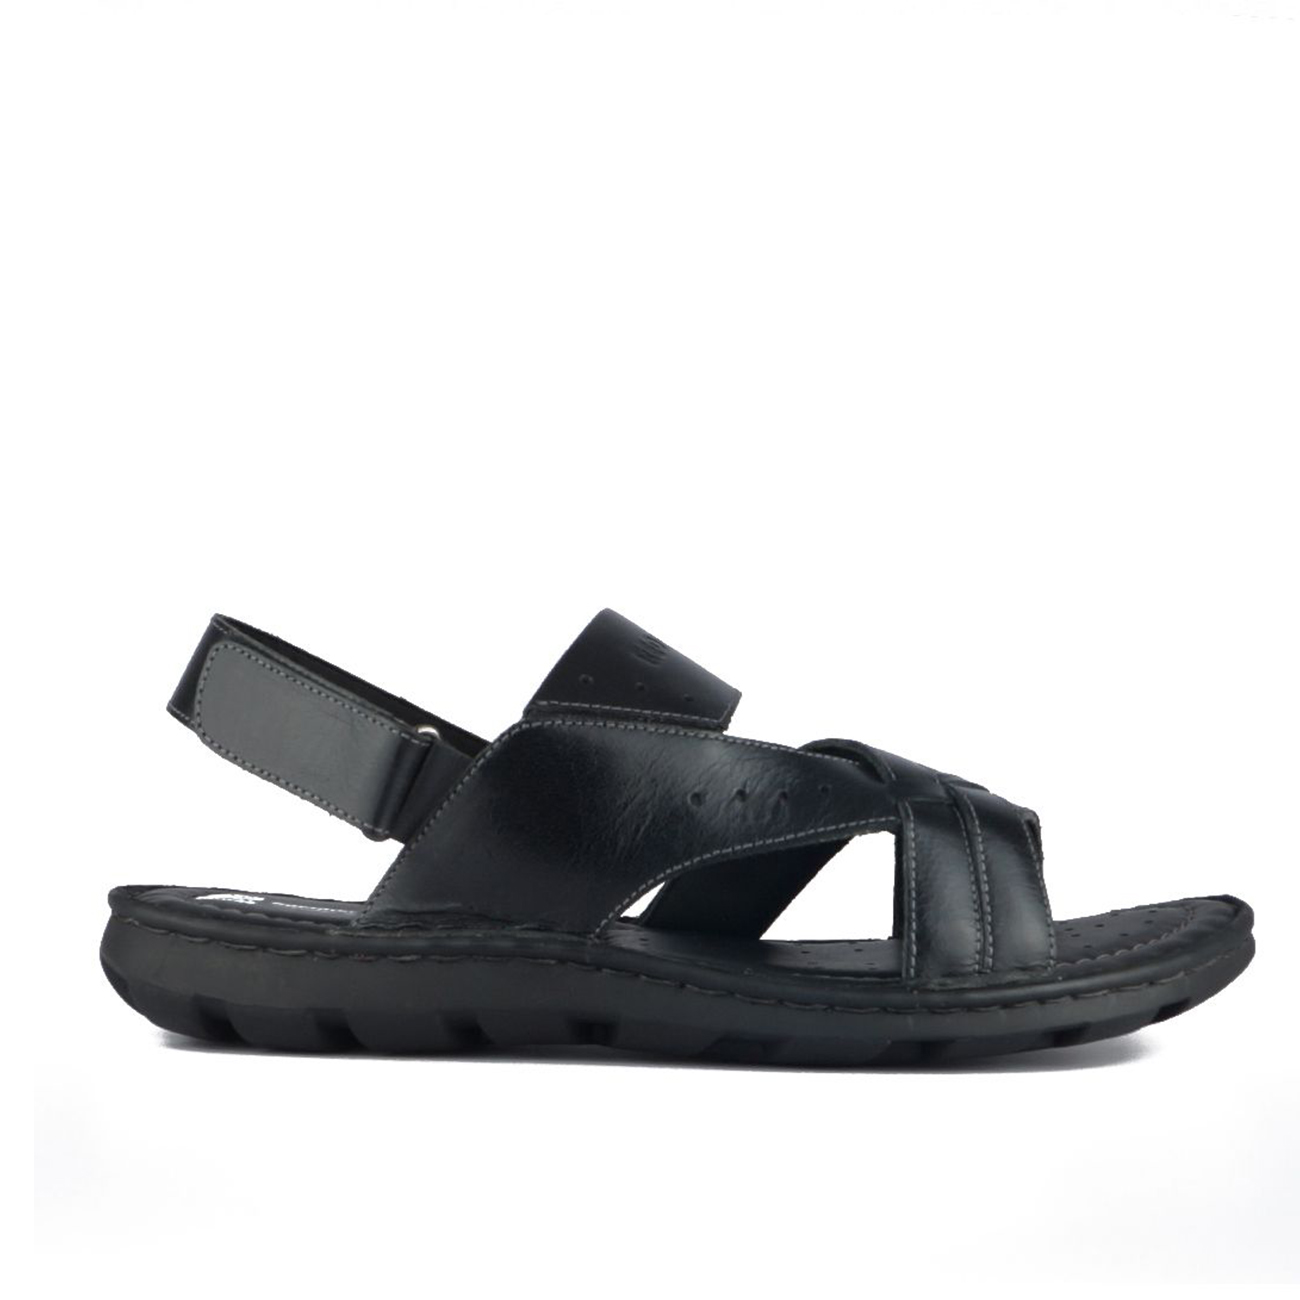 Kids Sandals: Buy Kids Sandals Online at Best Prices in India - Snapdeal.